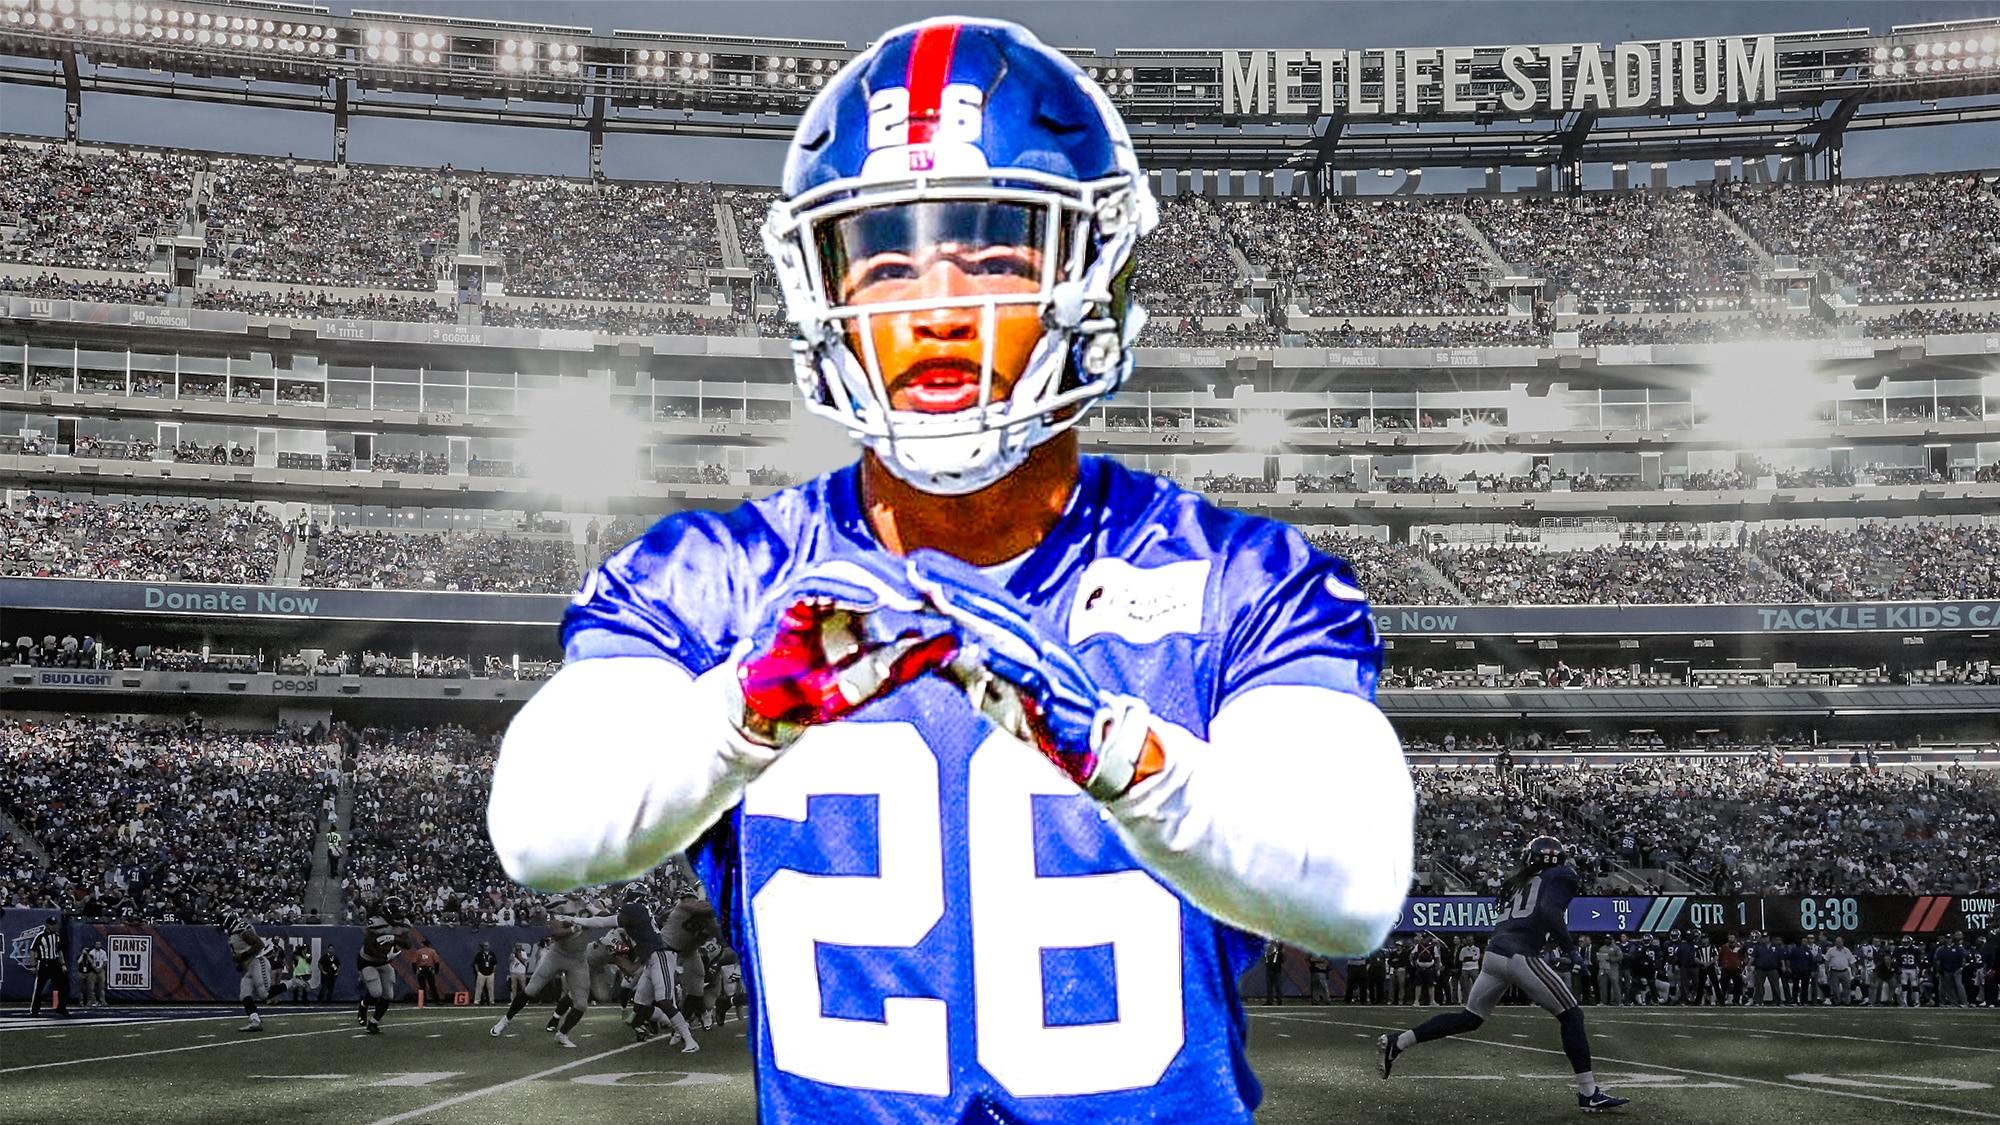 New York Giants RB Saquon Barkley could easily finish 2nd